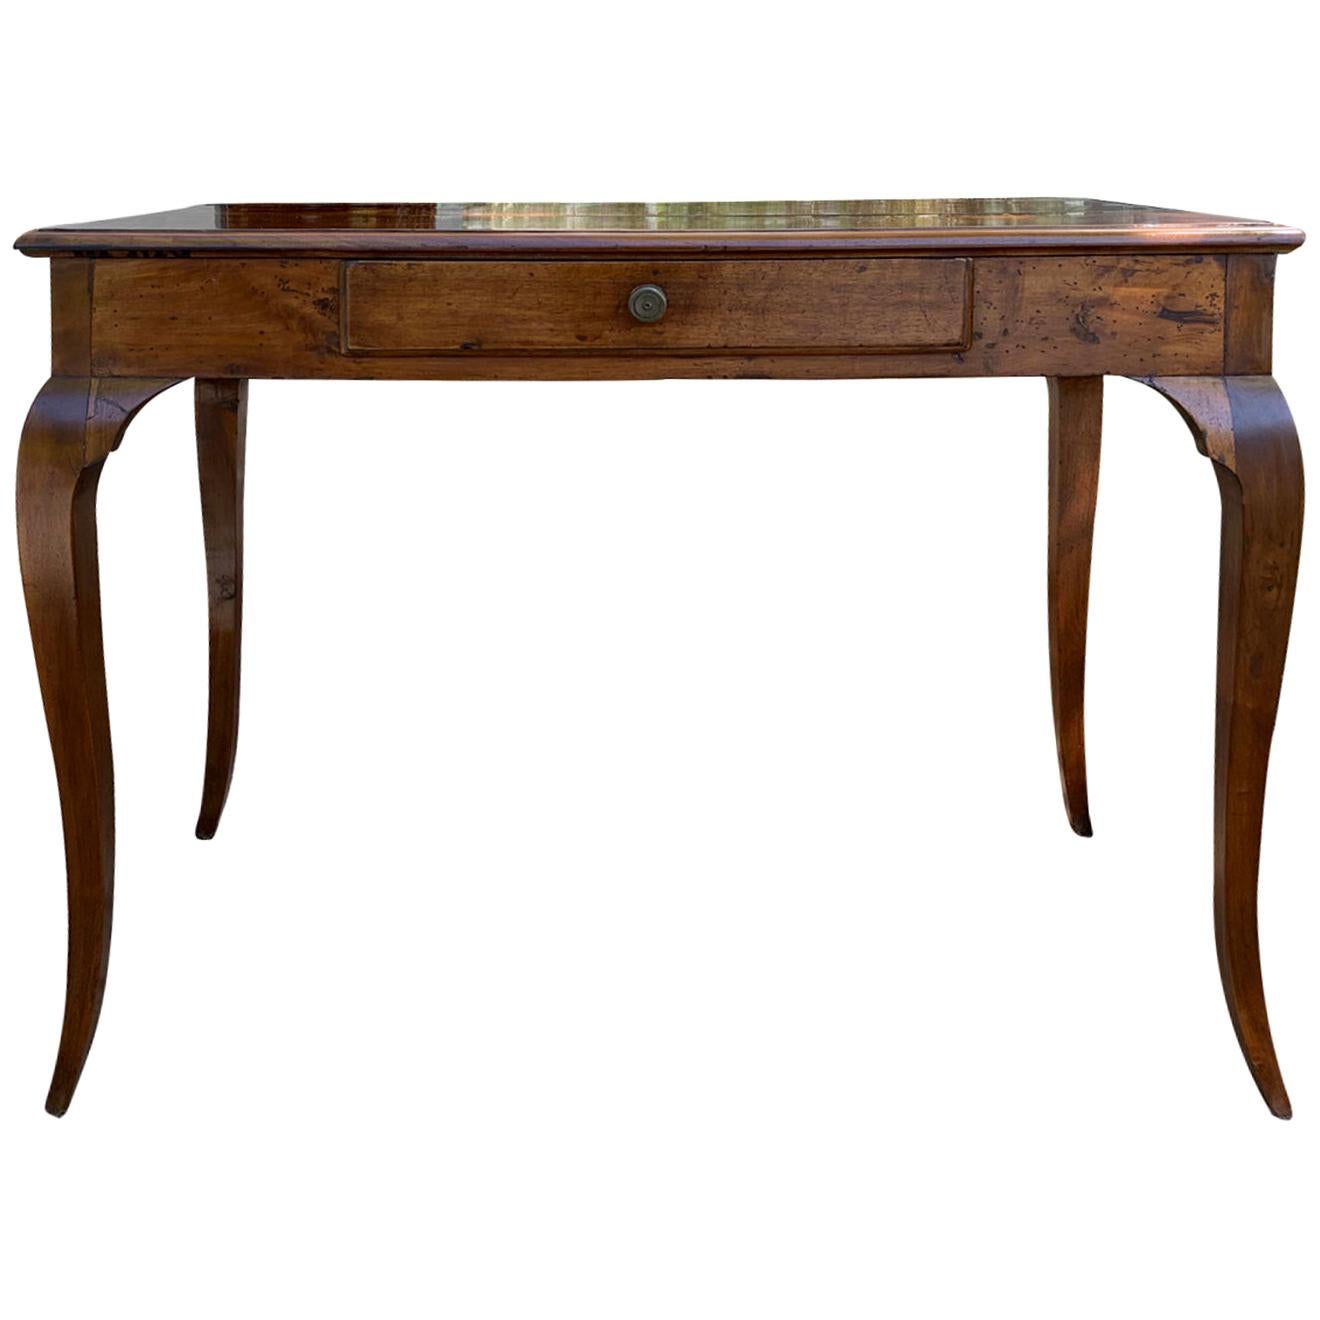 18th-19th Century Italian Fruitwood Writing Table or Desk, One Drawer